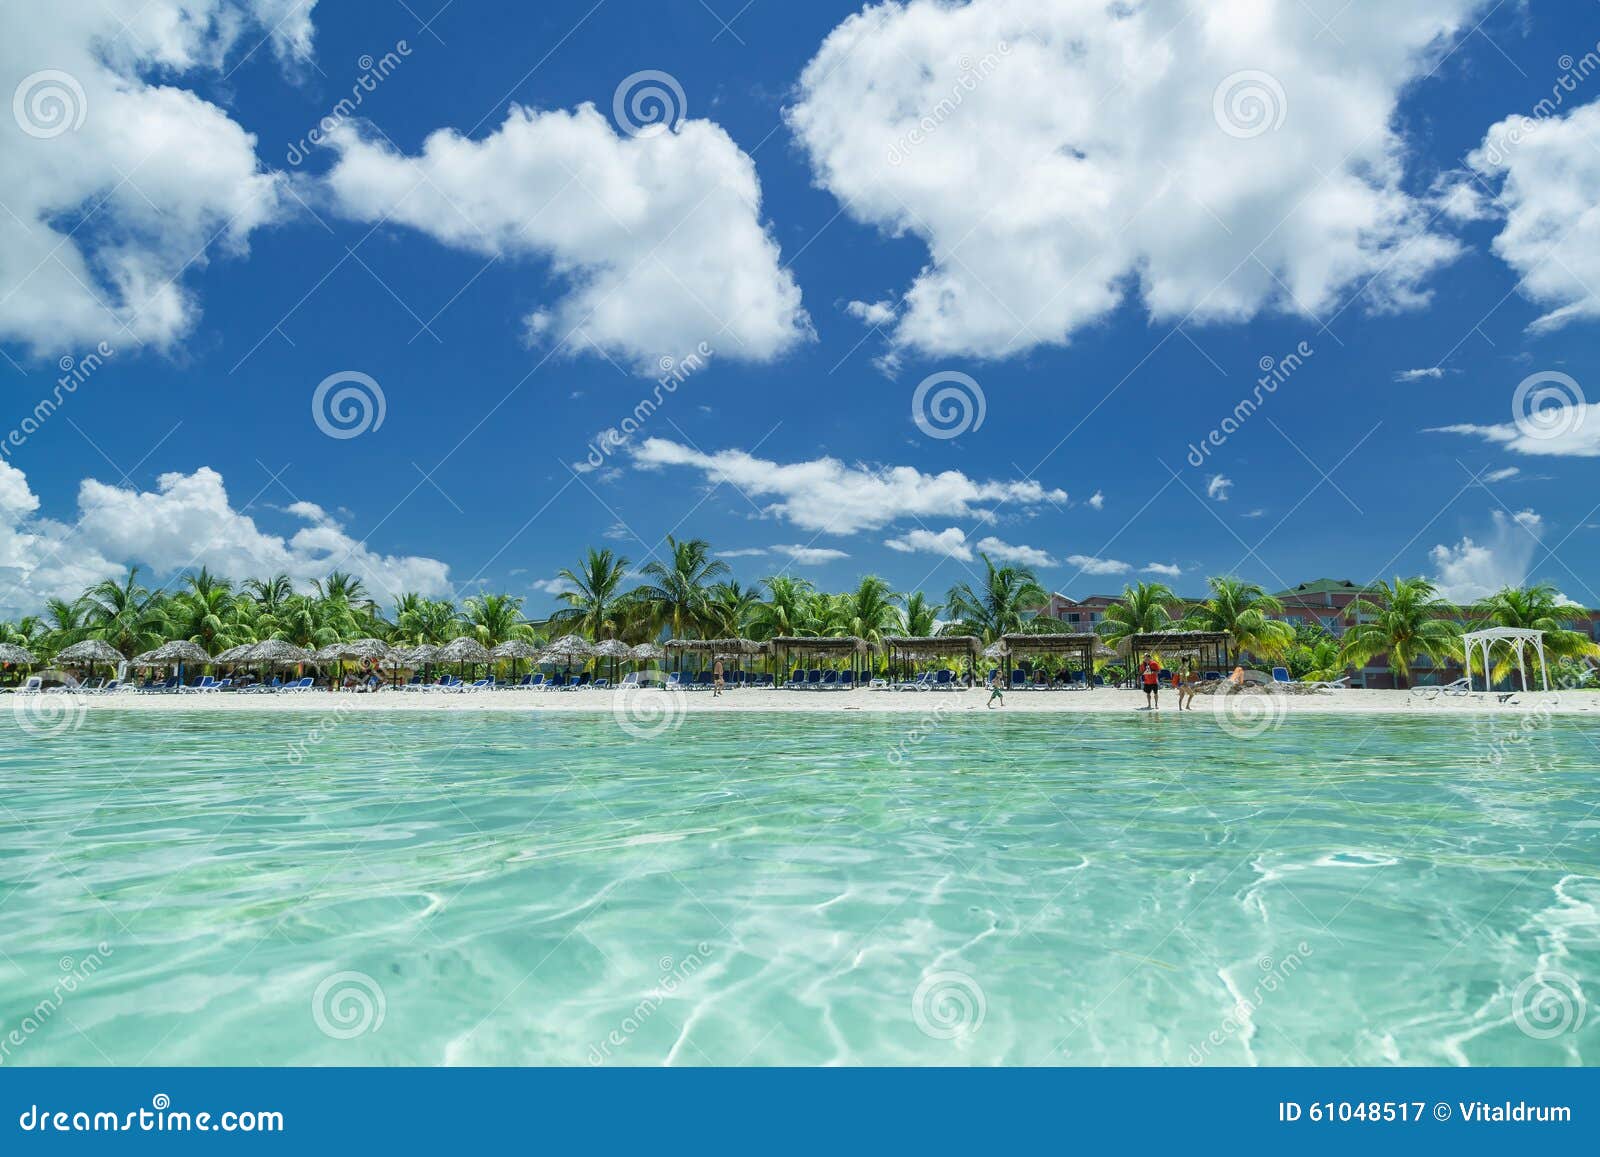 amazing inviting view of cuban, cayo coco beach from the tranquil turquoise ocean side, with people in background